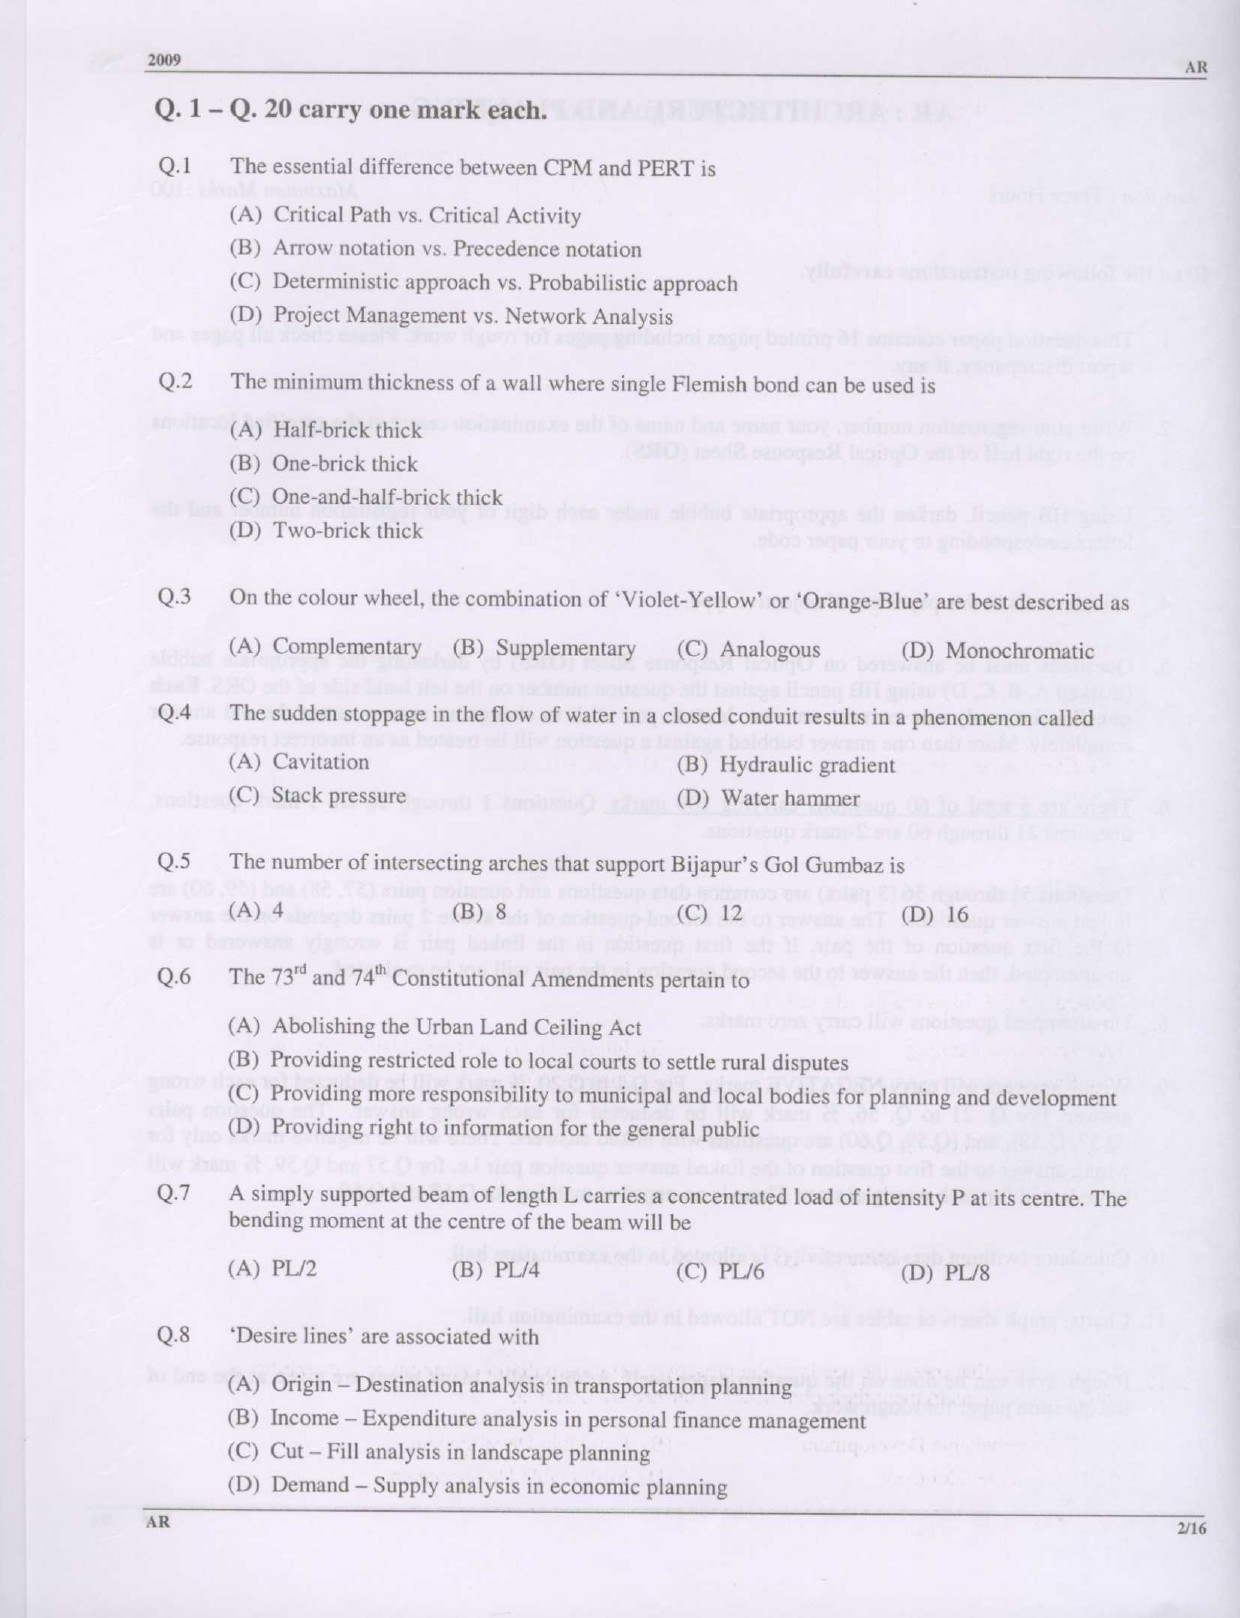 GATE Exam Question Paper 2009 Architecture and Planning 2